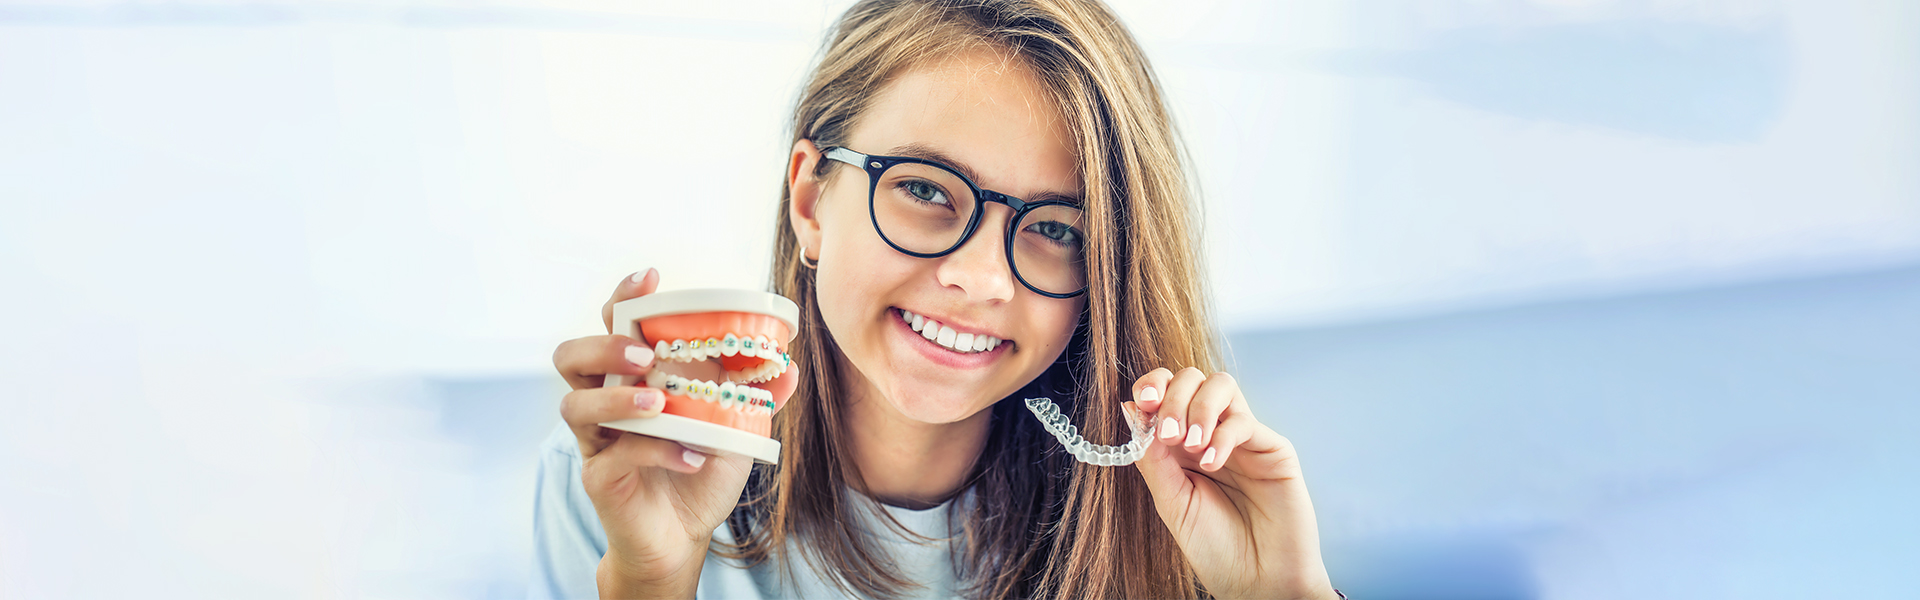 How Is Invisalign Better Than Metal Braces?